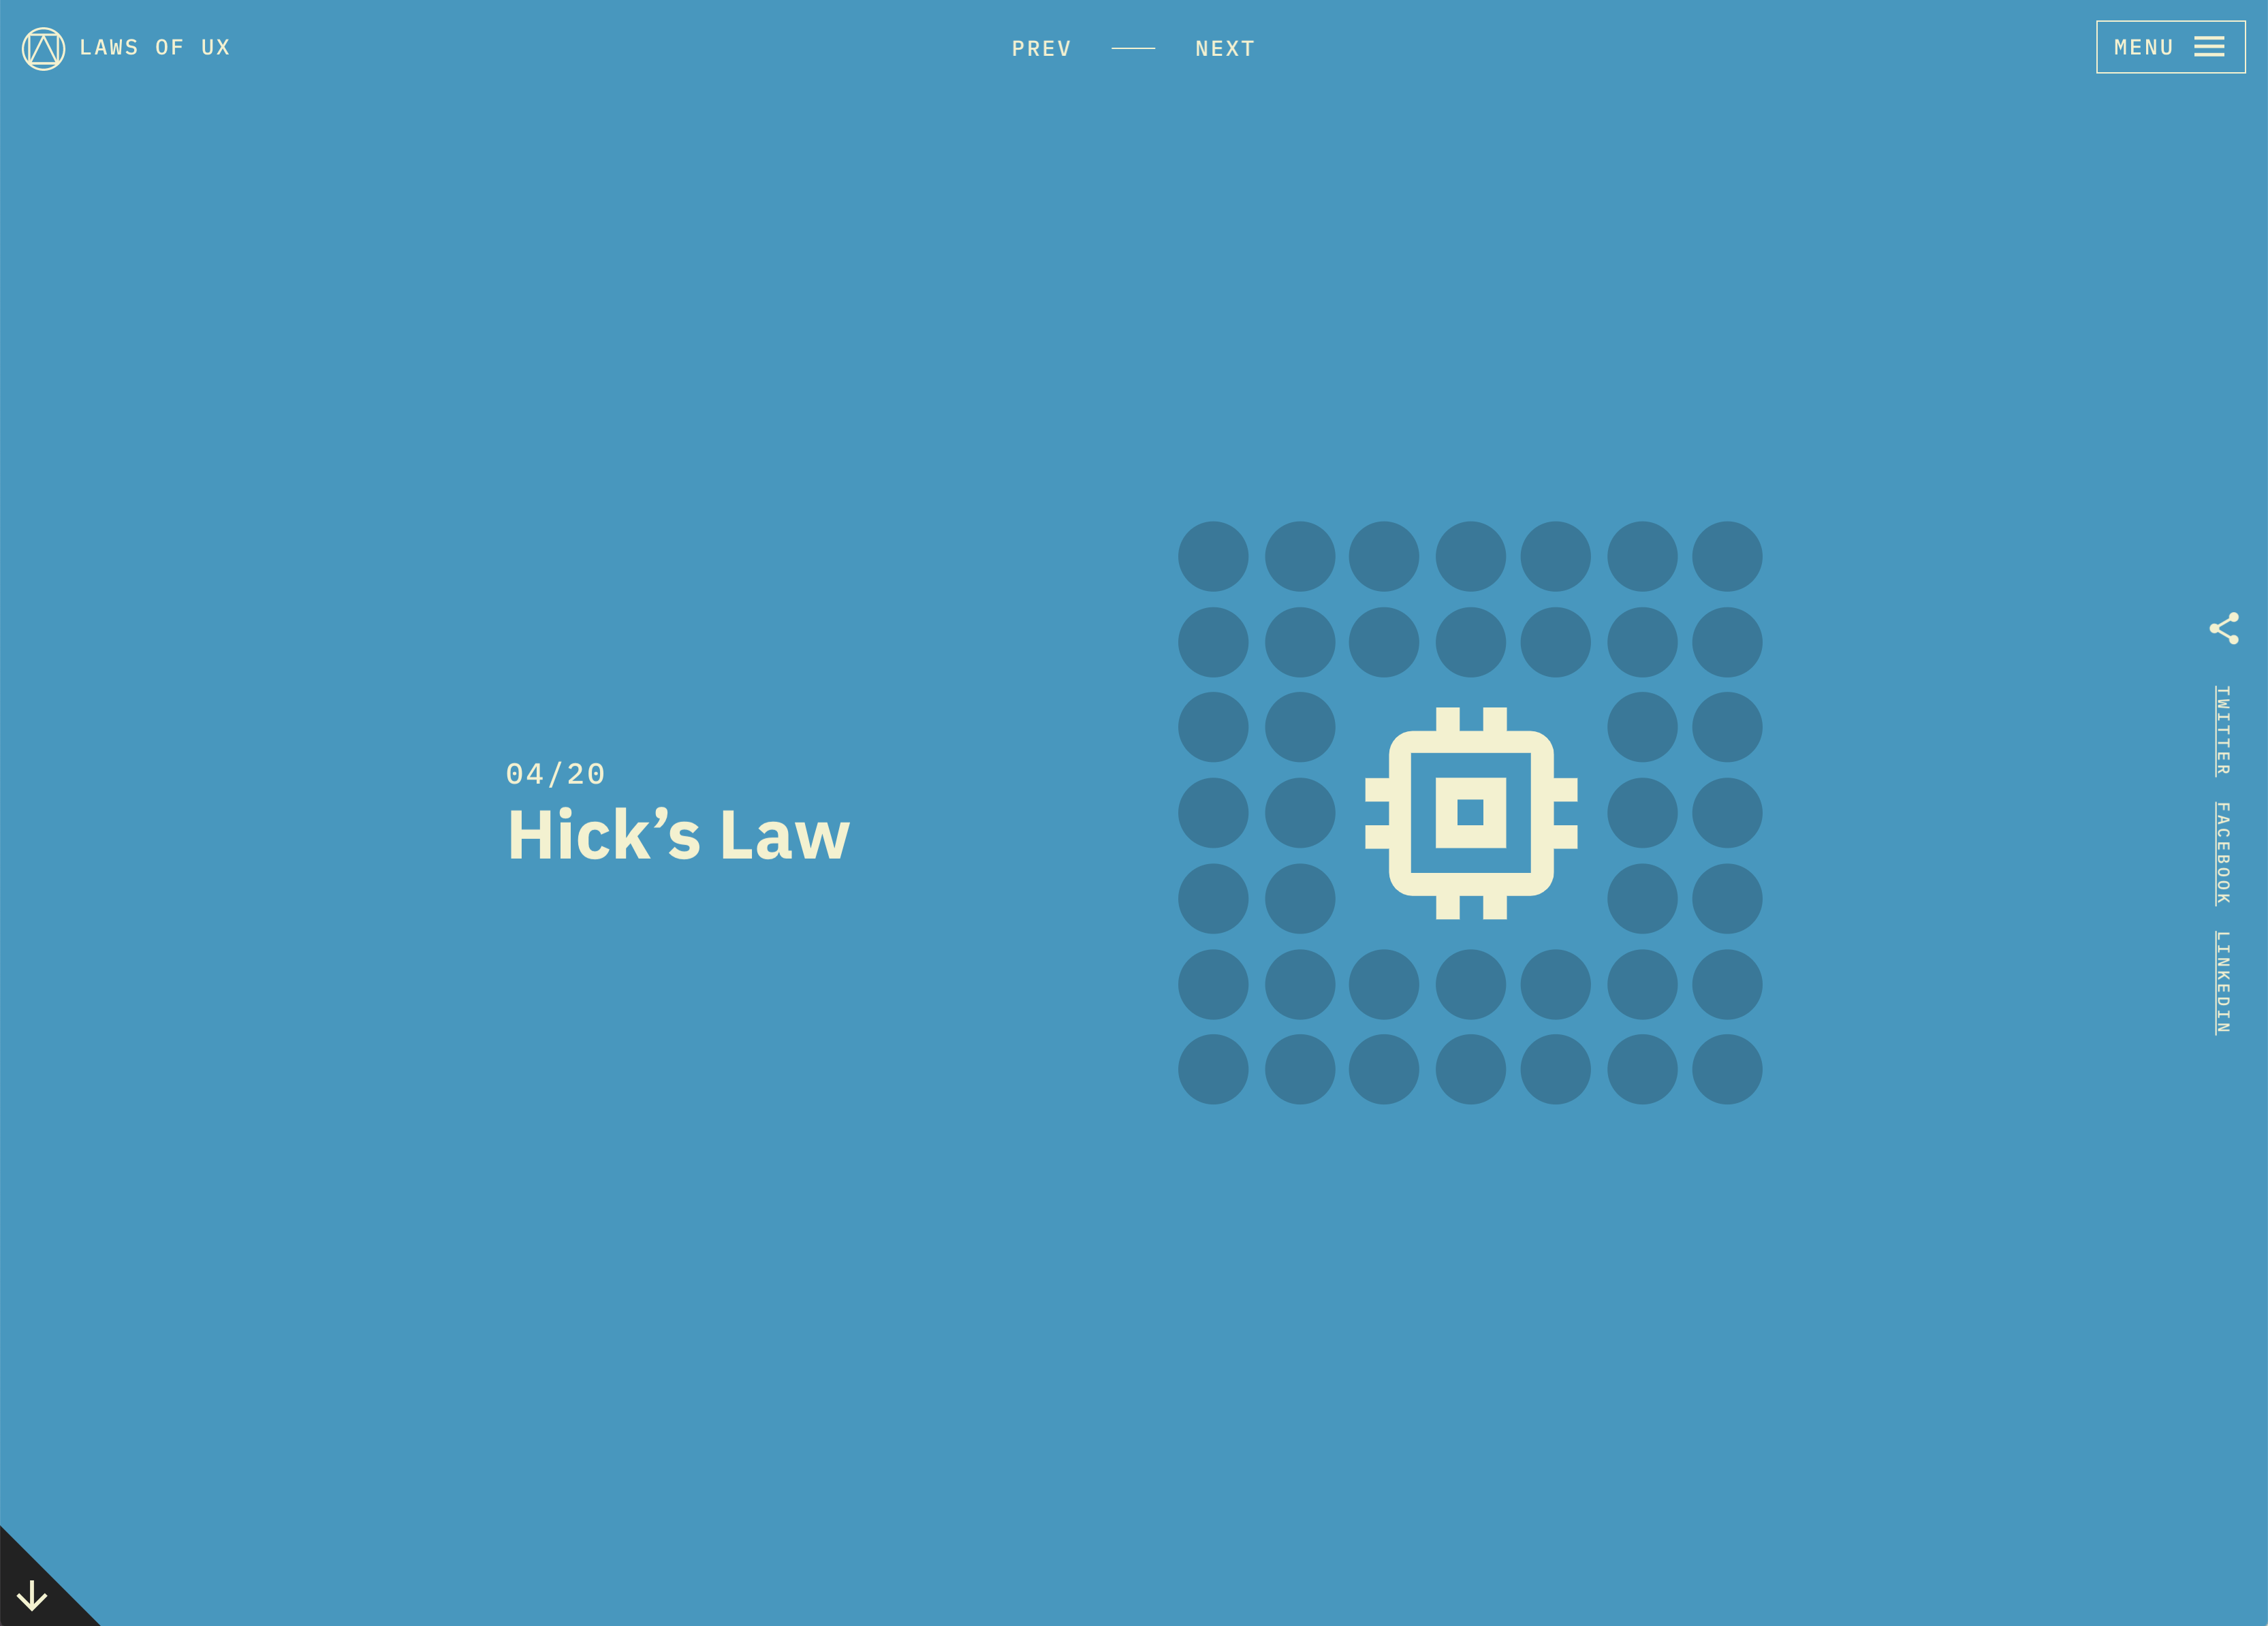 Hick's Law cover